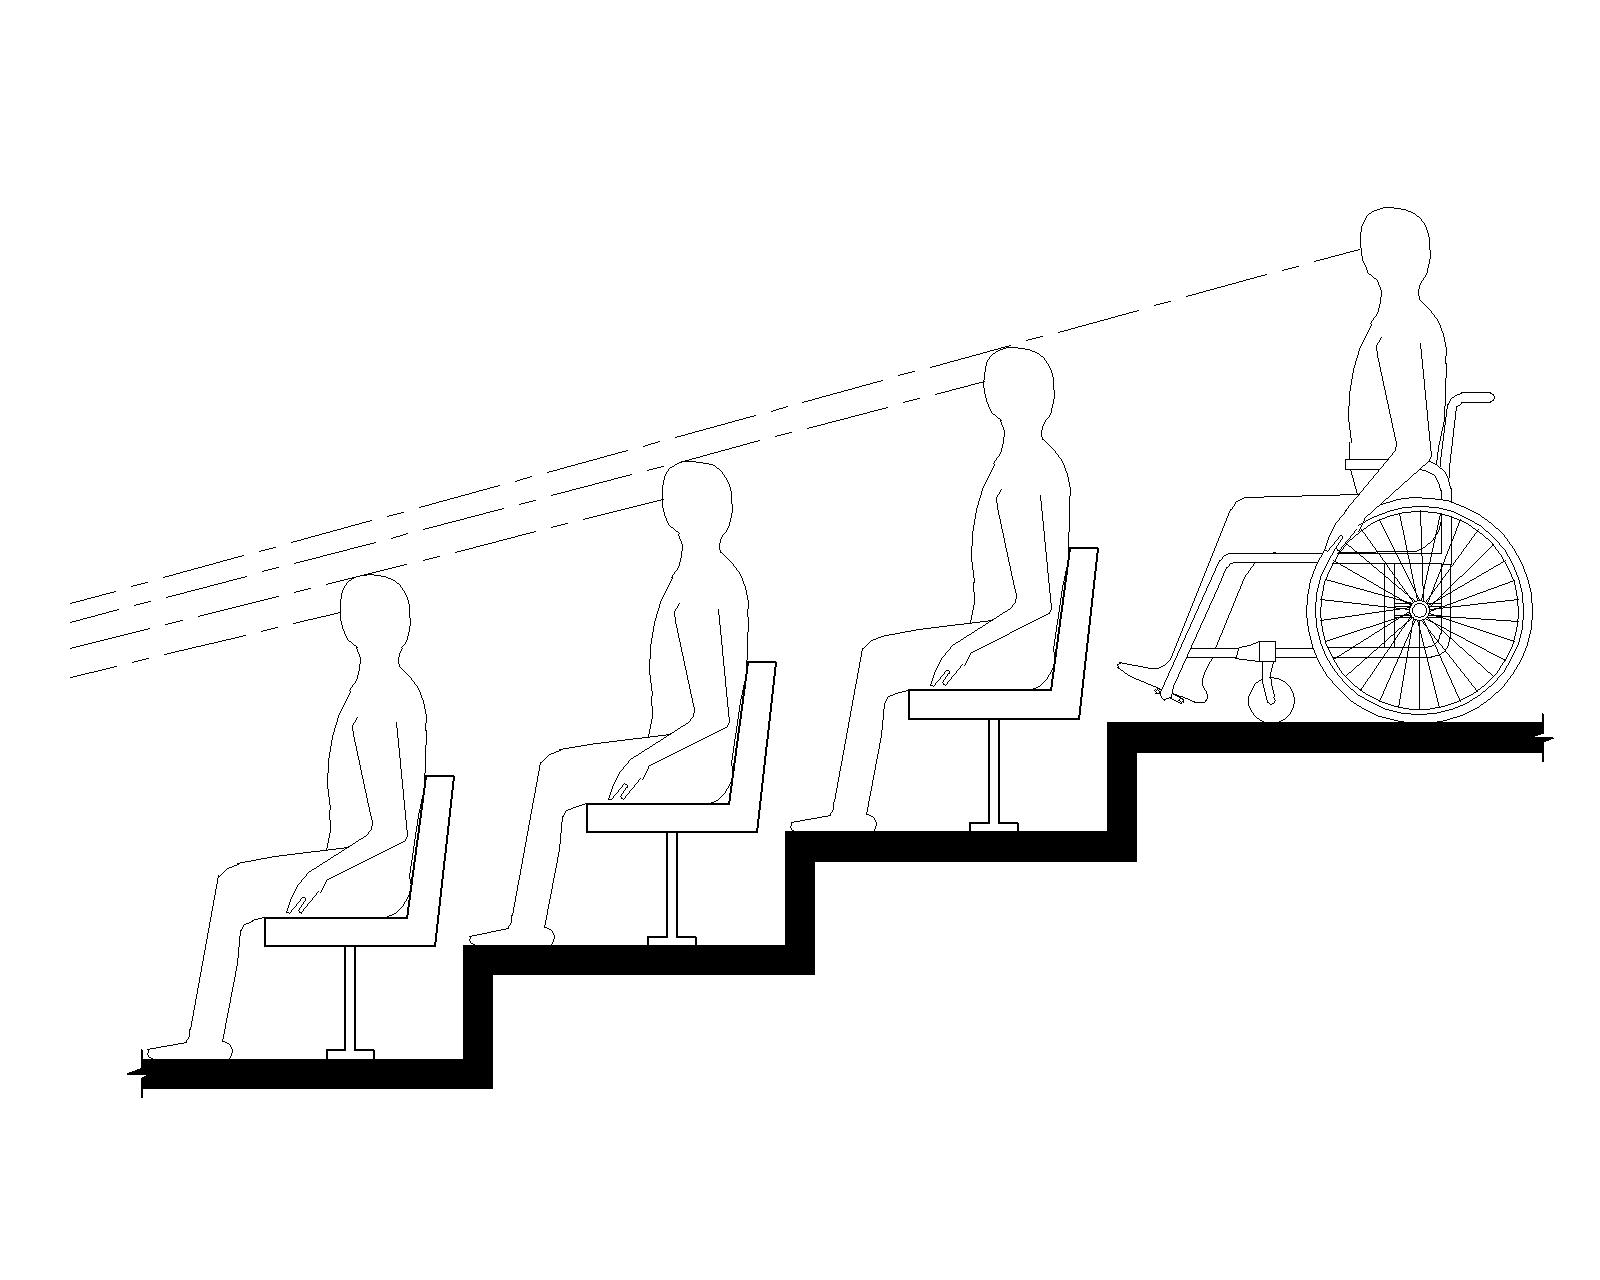 Elevation drawing shows a person using a wheelchair on an upper level of tiered seating having a line of sight over the heads of spectators seated in front.